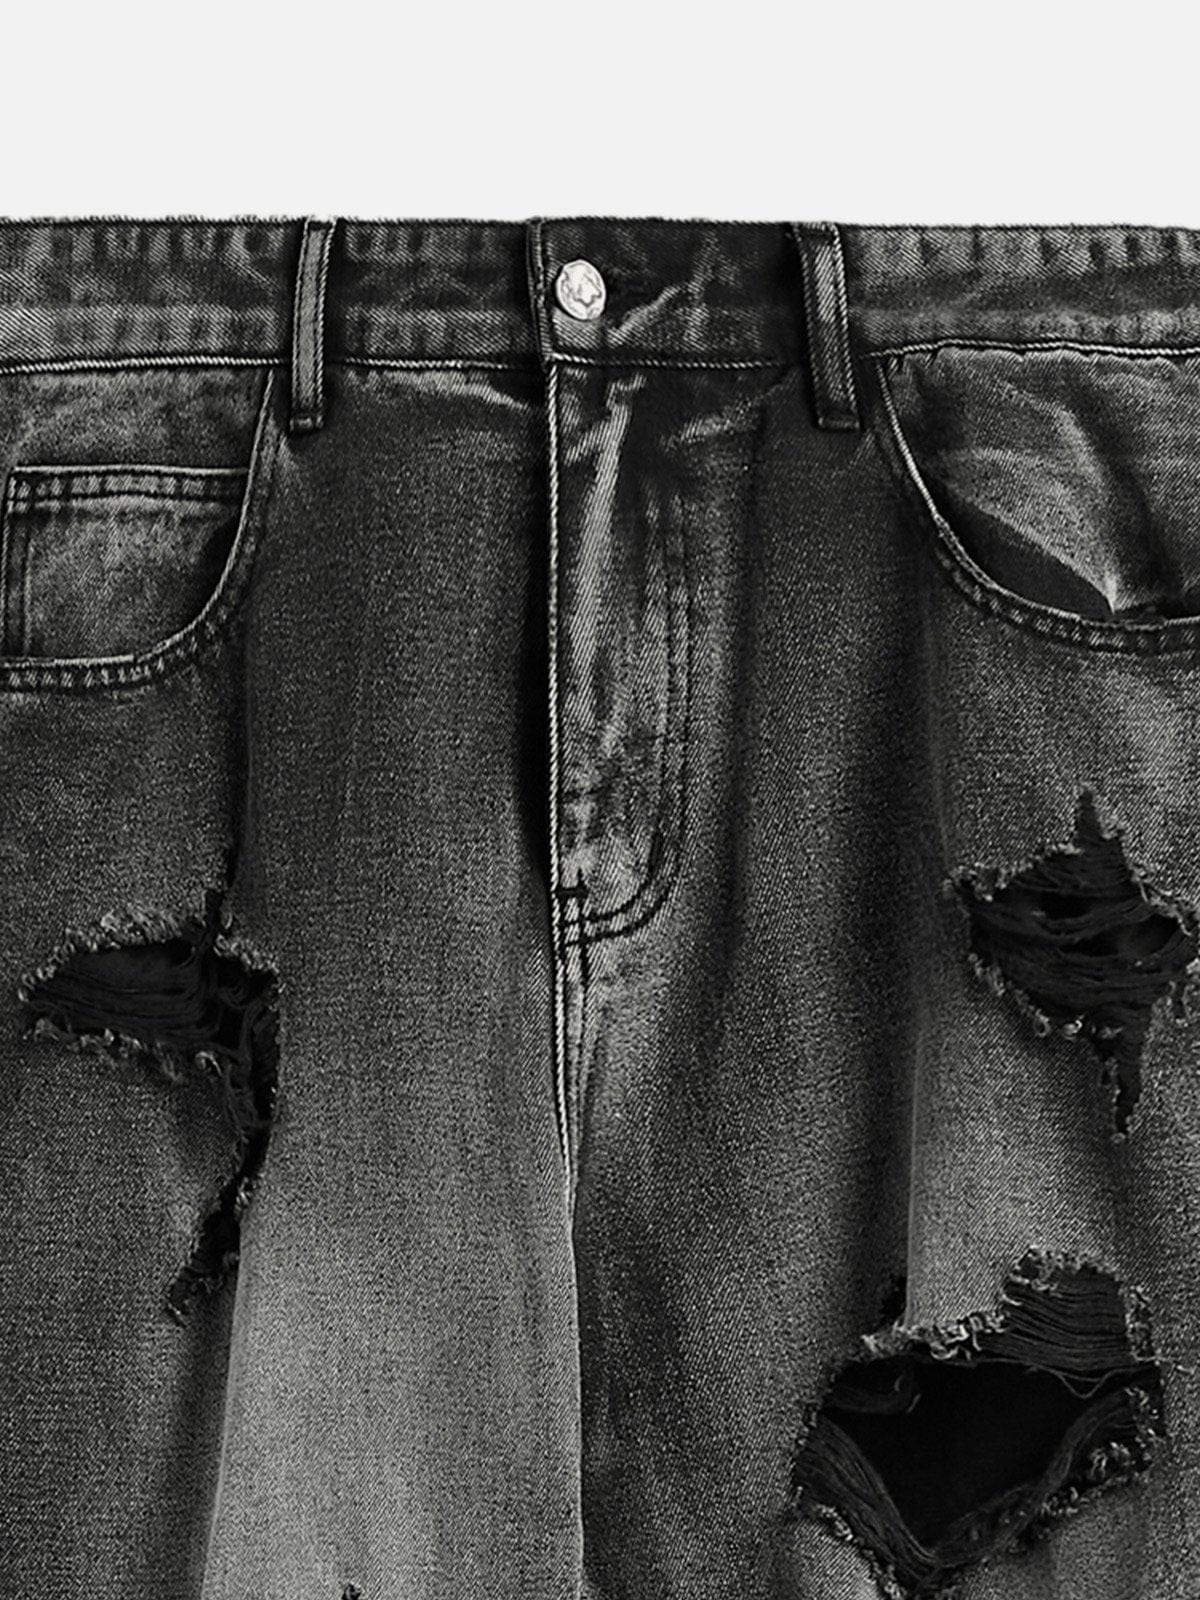 NEV Distressed Washed Ripped Jeans